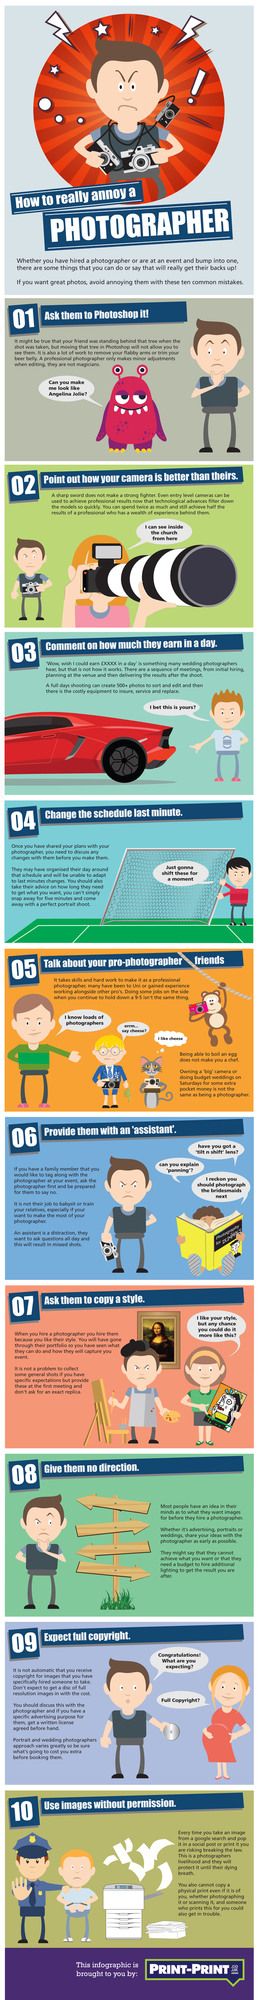 How-to-annoy-a-Photographer.print-print